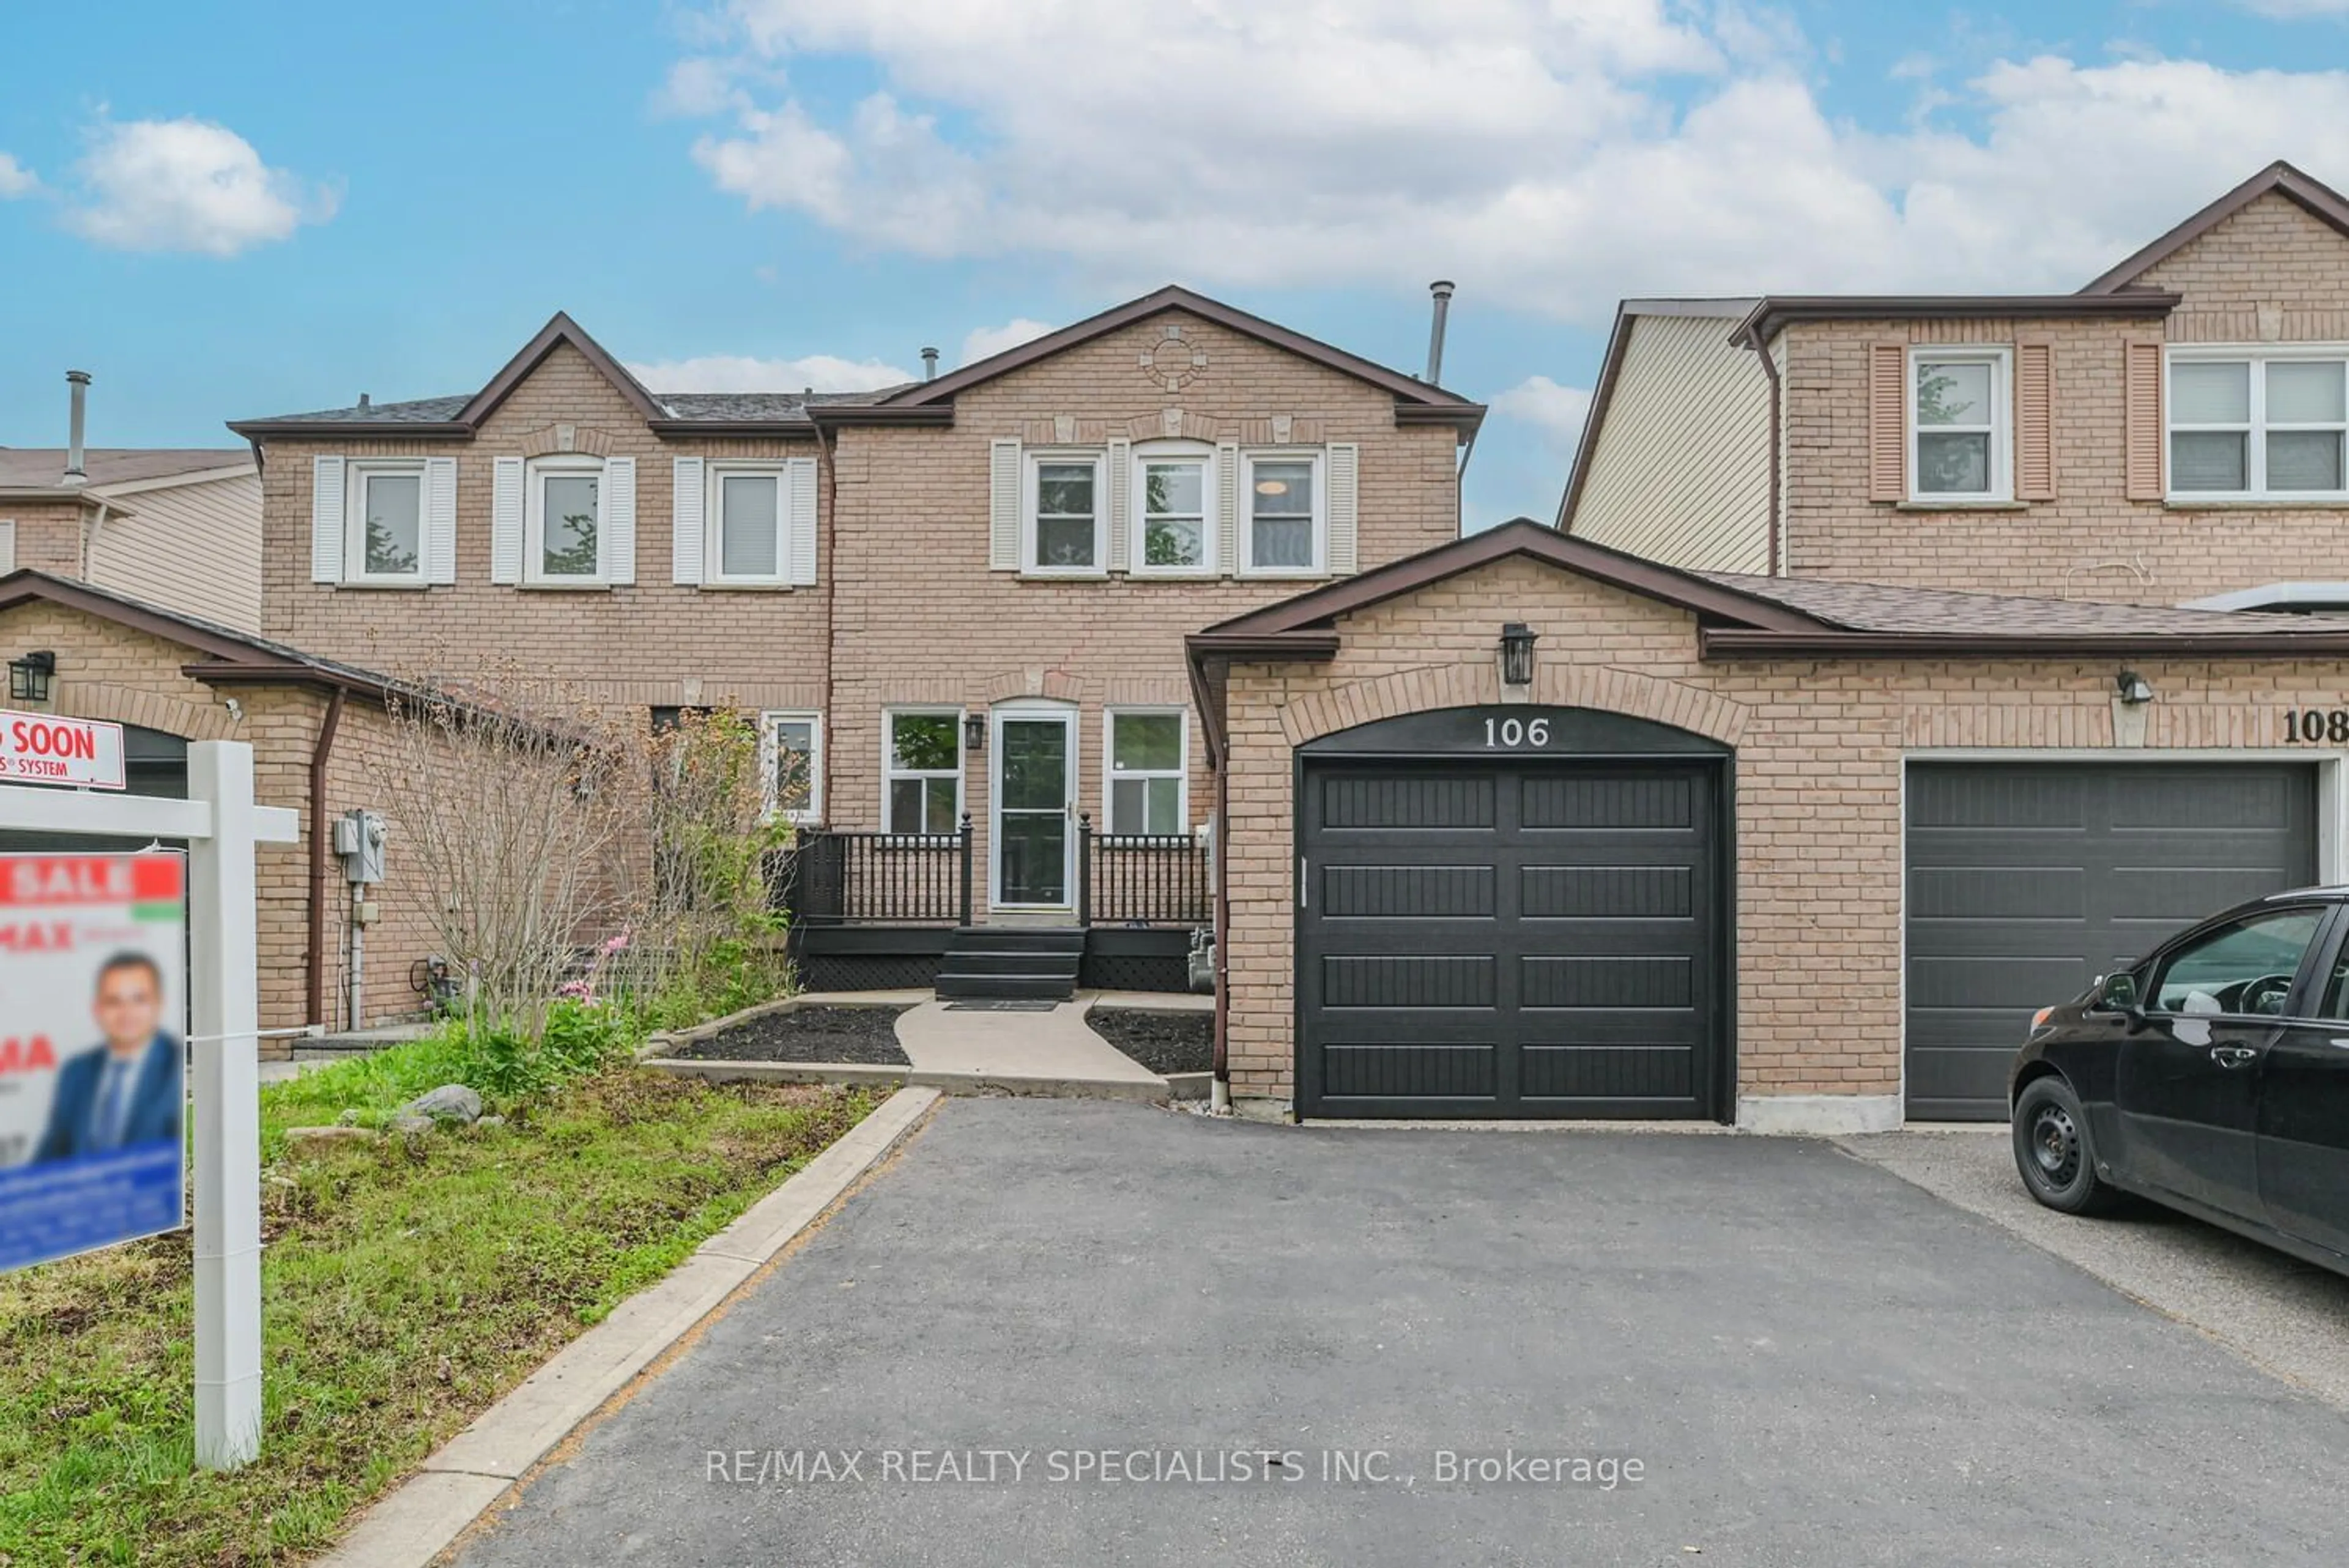 Frontside or backside of a home for 106 Cutters Cres, Brampton Ontario L6Y 4J8